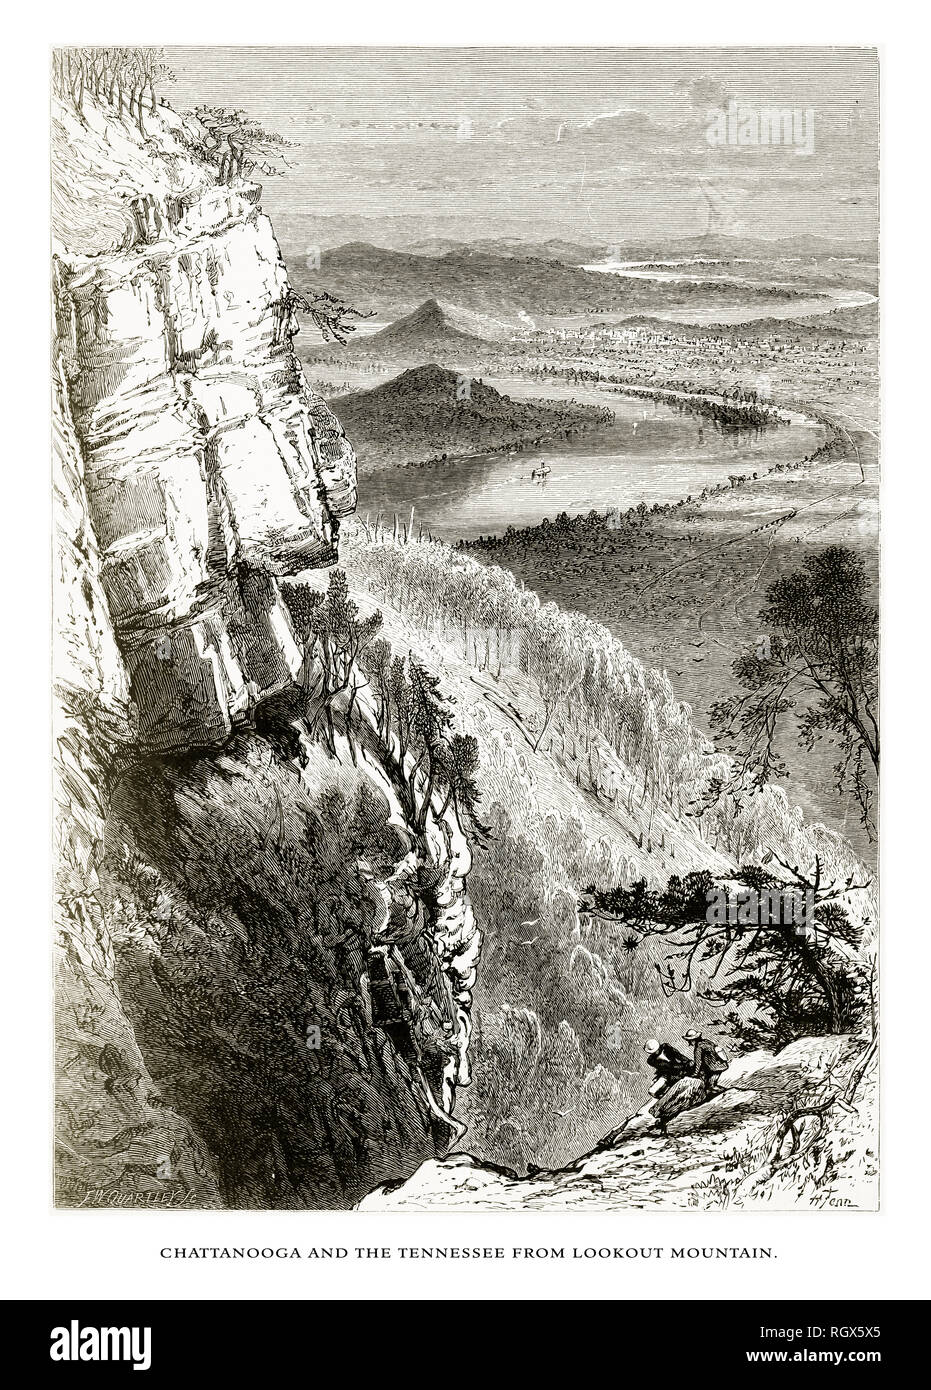 Chattanooga and the Tennessee River from Lookout Mountain, Tennessee, United States, American Victorian Engraving, 1872 Stock Photo